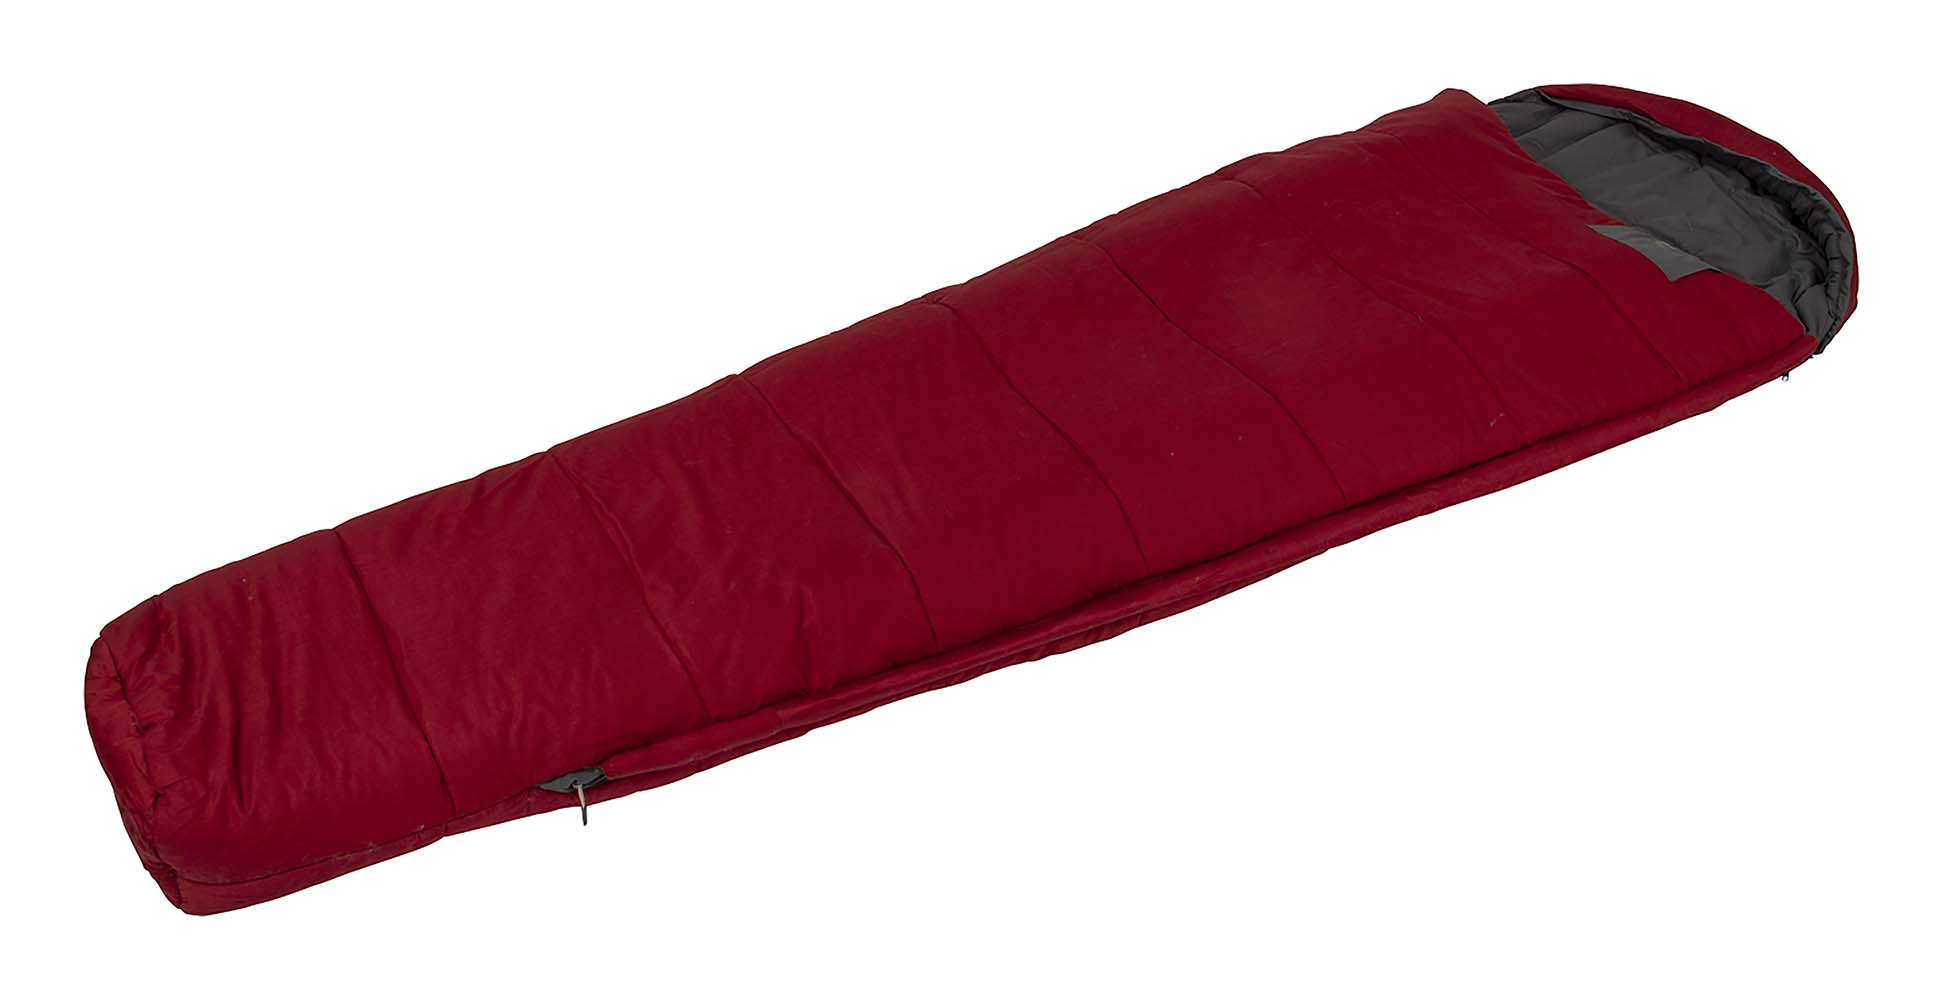 3605898 "A very luxurious mummy sleeping bag with a warm and cool side. A 'warm side of extra soft brushed polyester. A 'cool lace' with very luxurious satin cotton. The sleeping bag can be used both straight and inside out. In addition, the sleeping bag is provided with extra insulation through 2 layers of a total of 400g/m² high quality microfiber siliconized filling. Comfortable from approx -4 degrees, usable from approx -1 degrees."